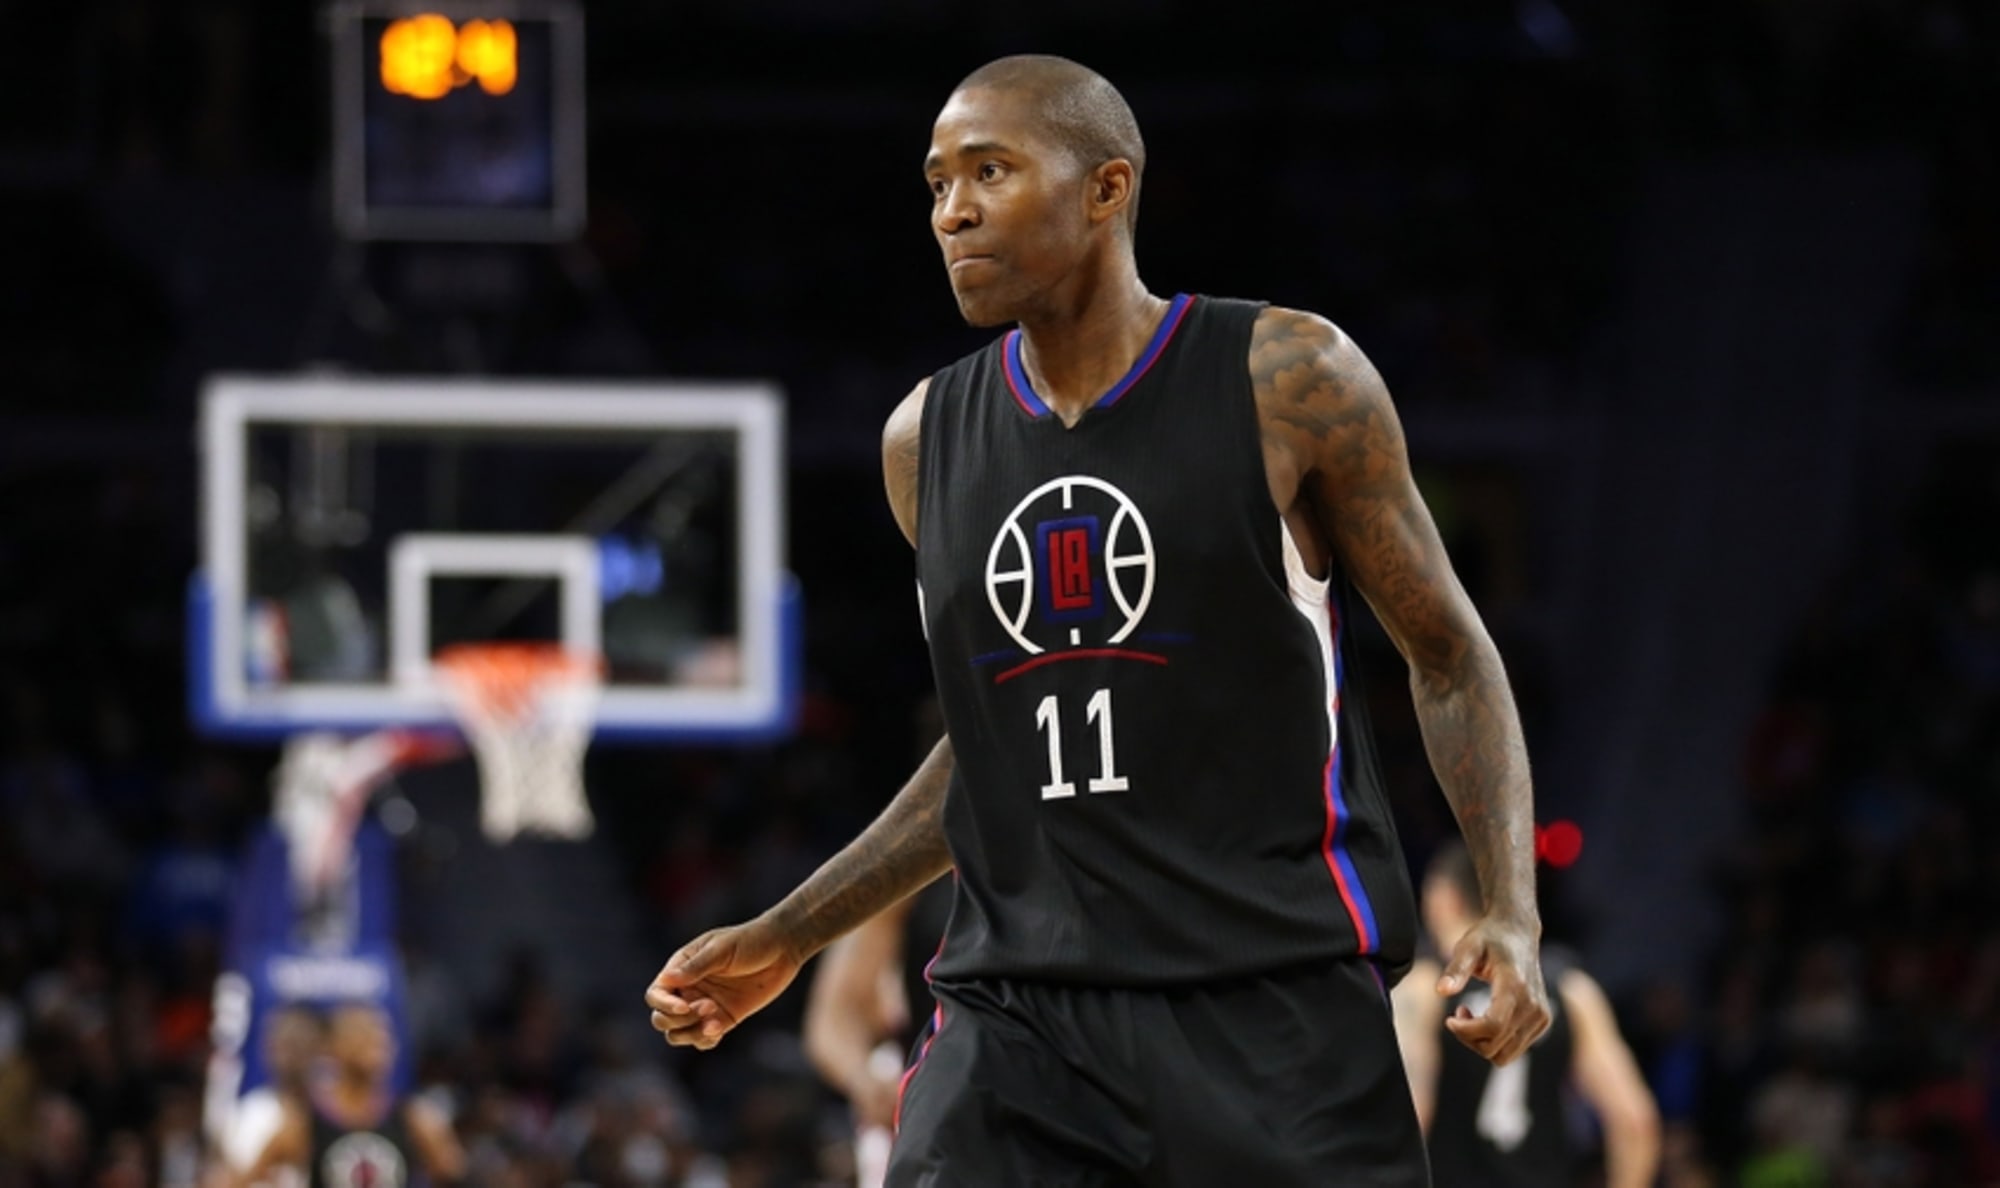 Jamal Crawford To Re-Sign With Clippers